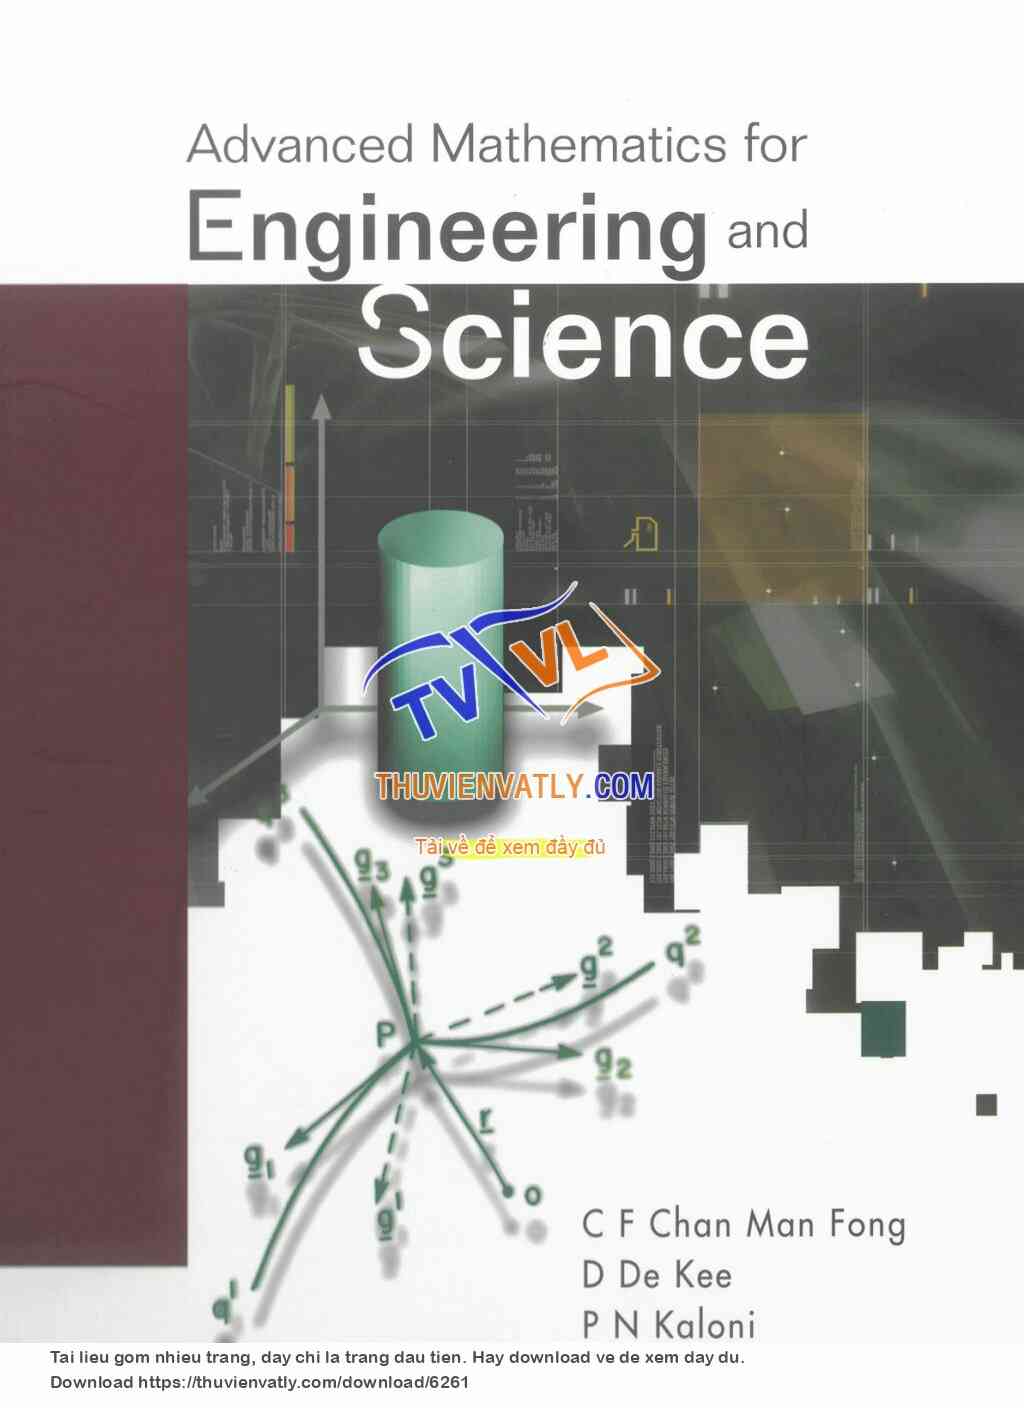 Advanced Mathematics for Engineering and Sciences